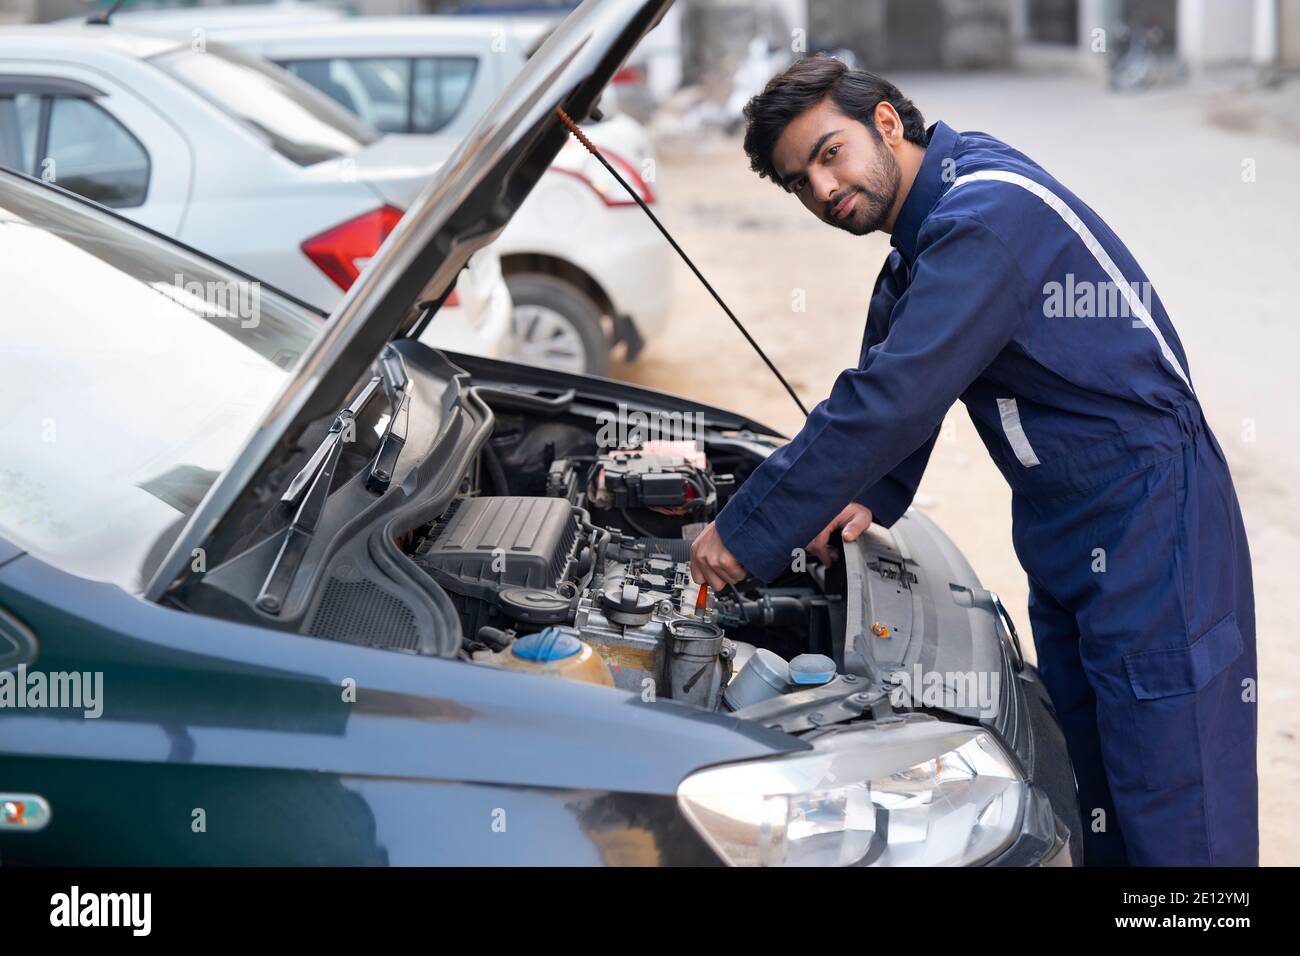 A YOUNG MECHANIC LOOKING AT CAMERA WHILE REPAIRING A CAR Stock Photo